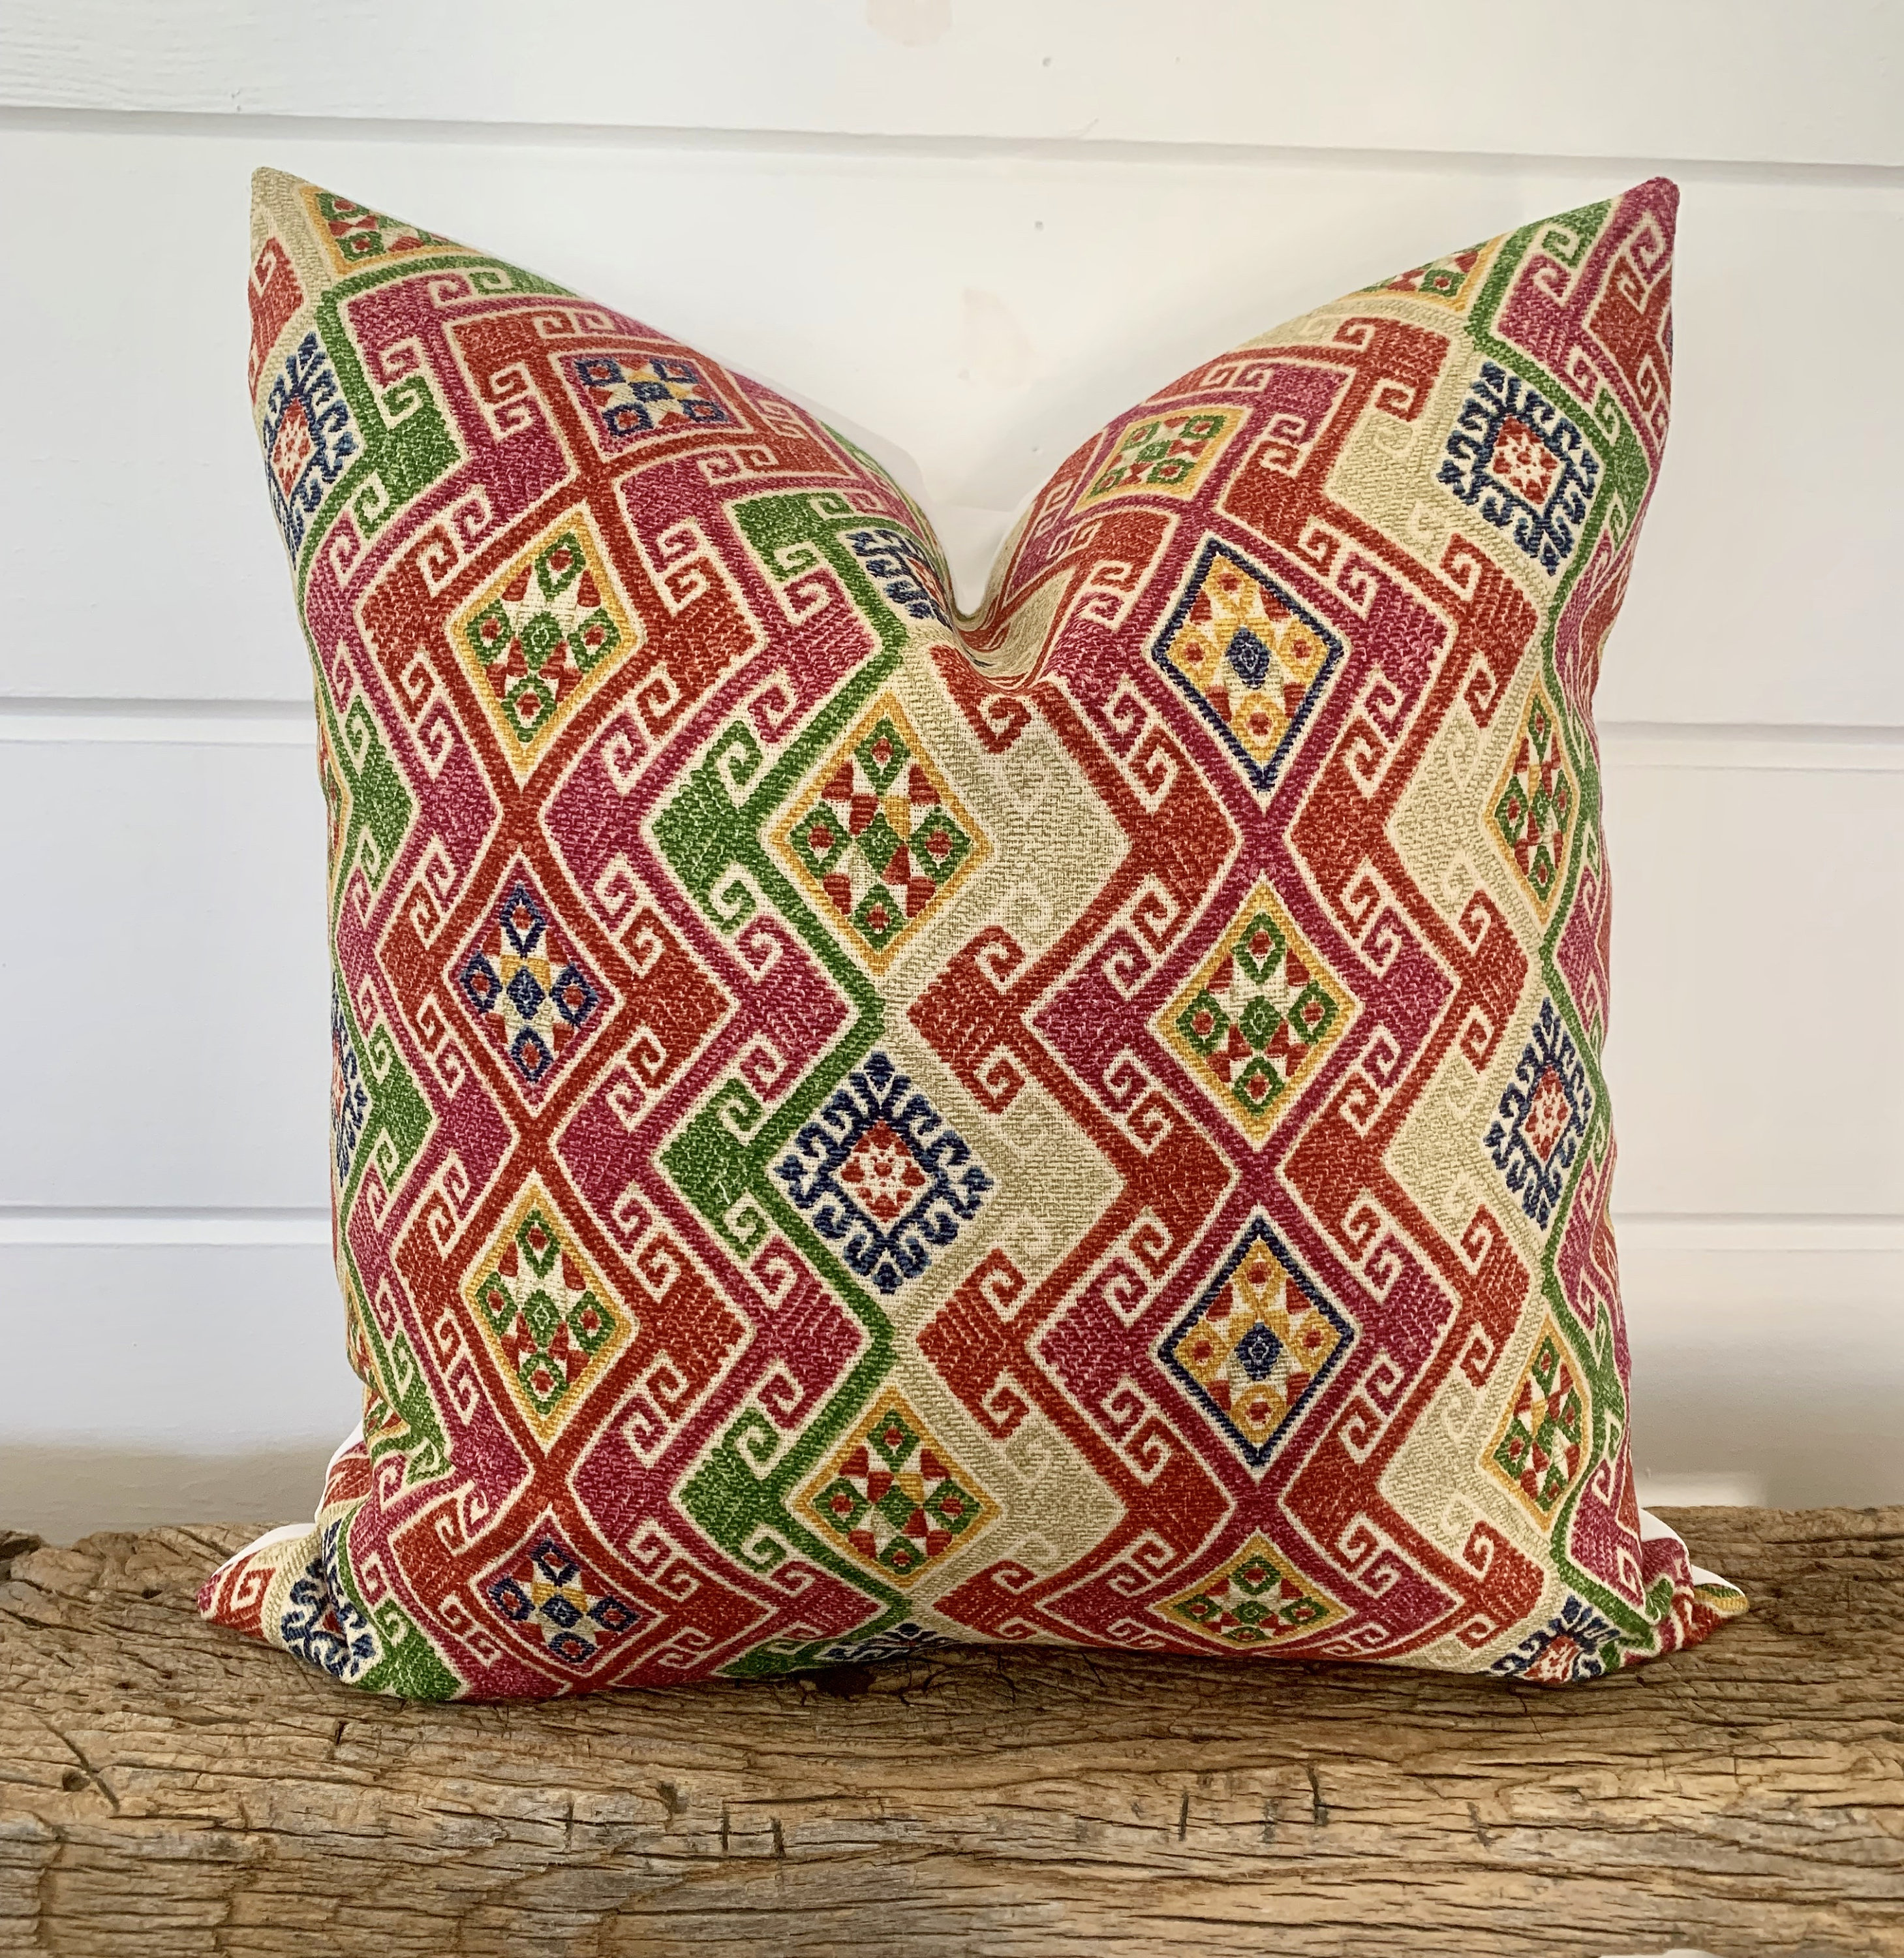 Ikat Floral Damask - Fuchsia and Pale Pink Throw Pillow